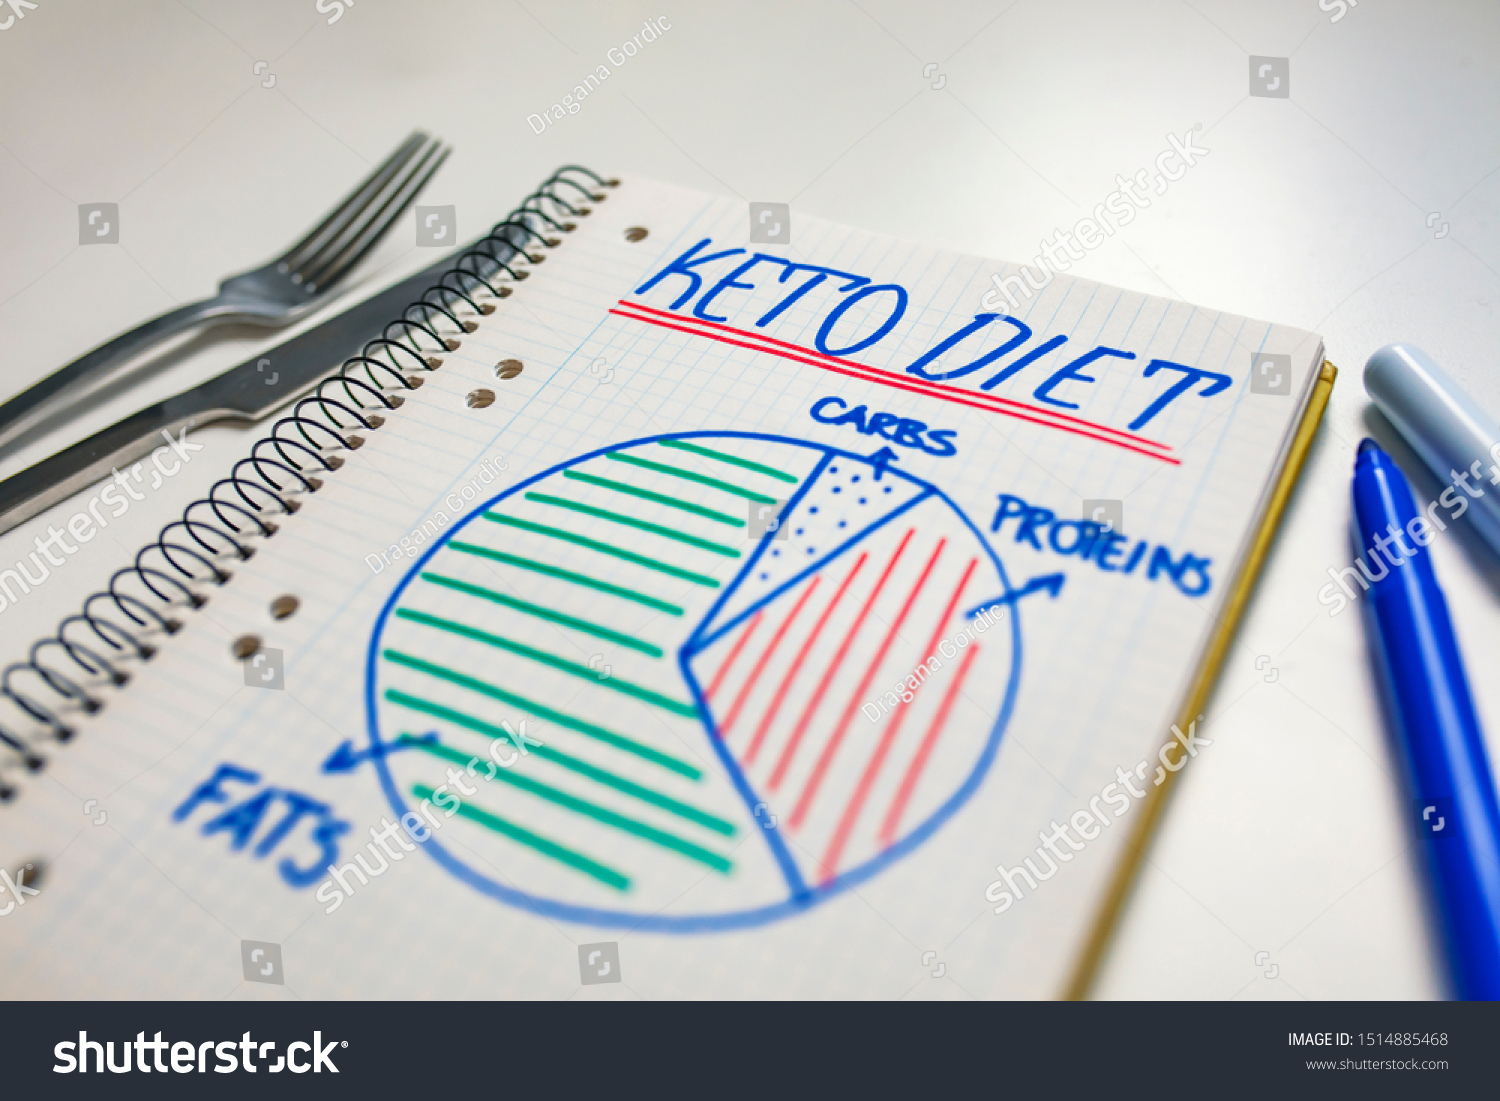 Ketogenic diet with nutrition diagram written on a note. Keto, ketogenic diet with nutrition diagram, low carb, high fat healthy weight loss meal plan. #1514885468